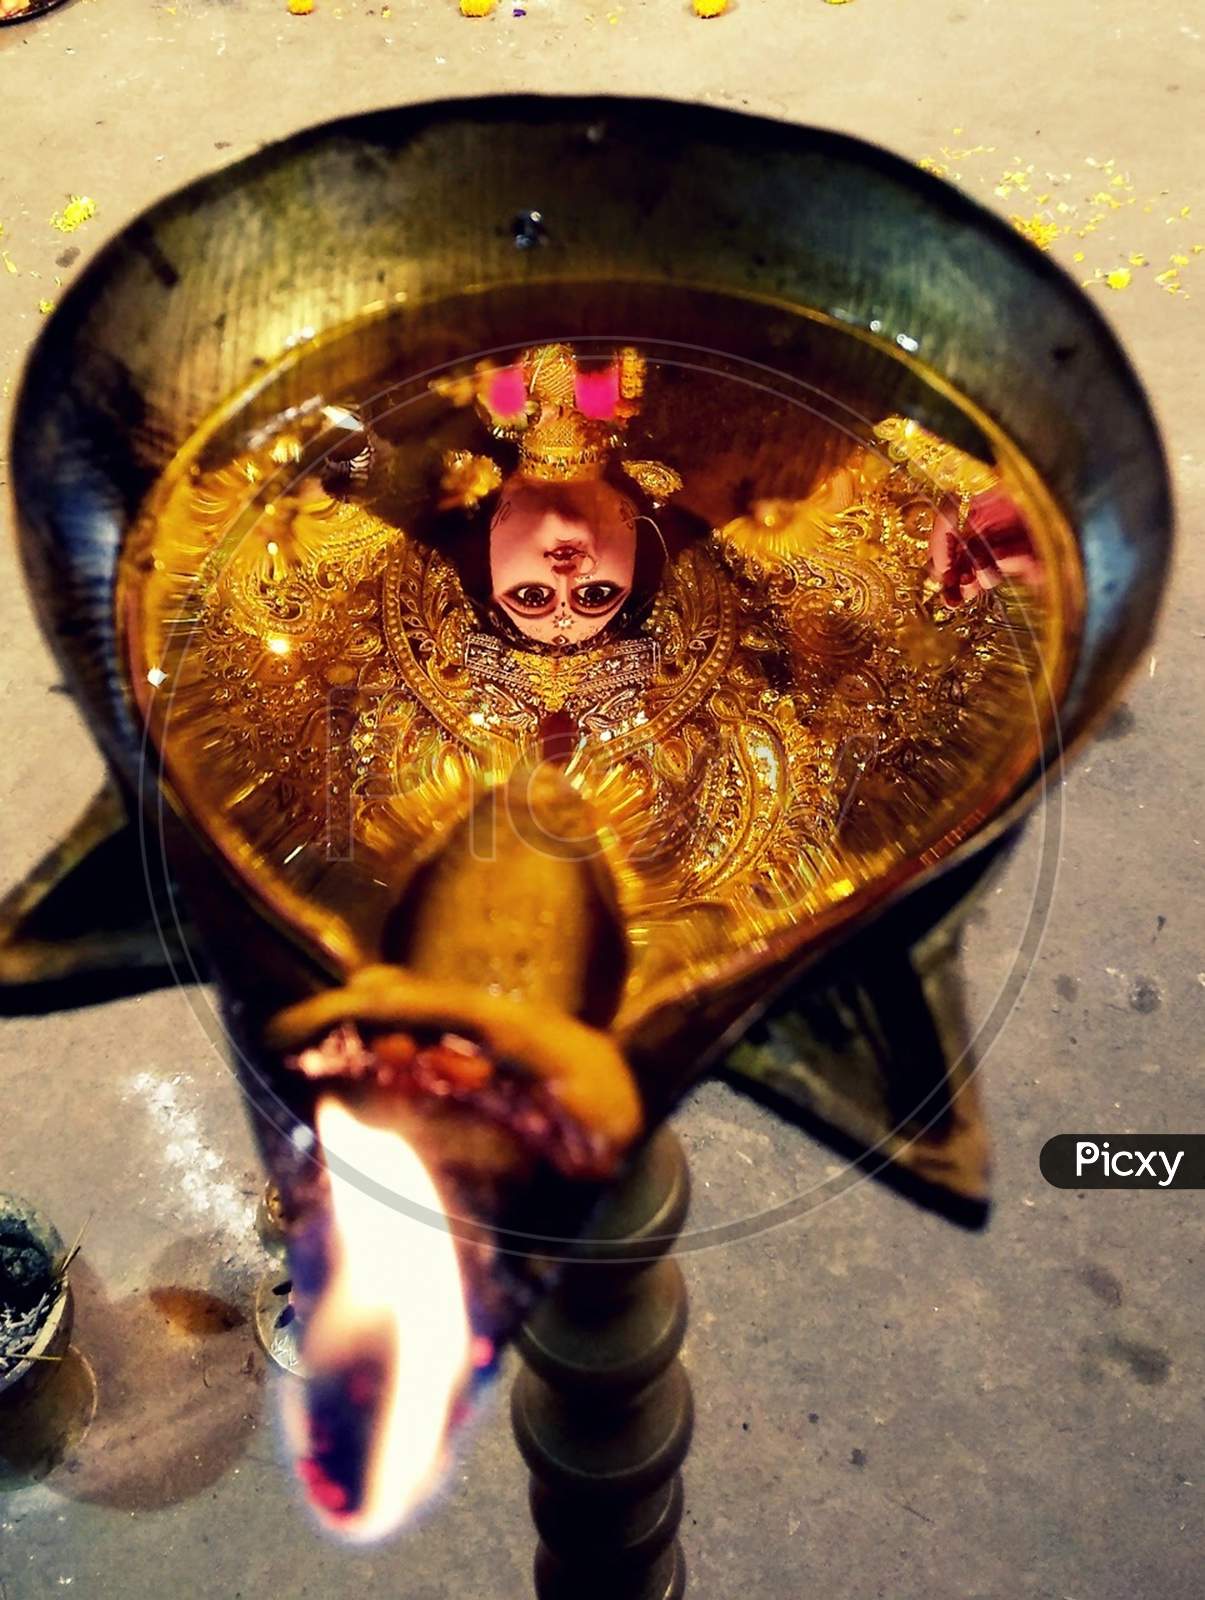 Reflection Of Deity In A Oil Lamp Of A Hindu Temple At Evening